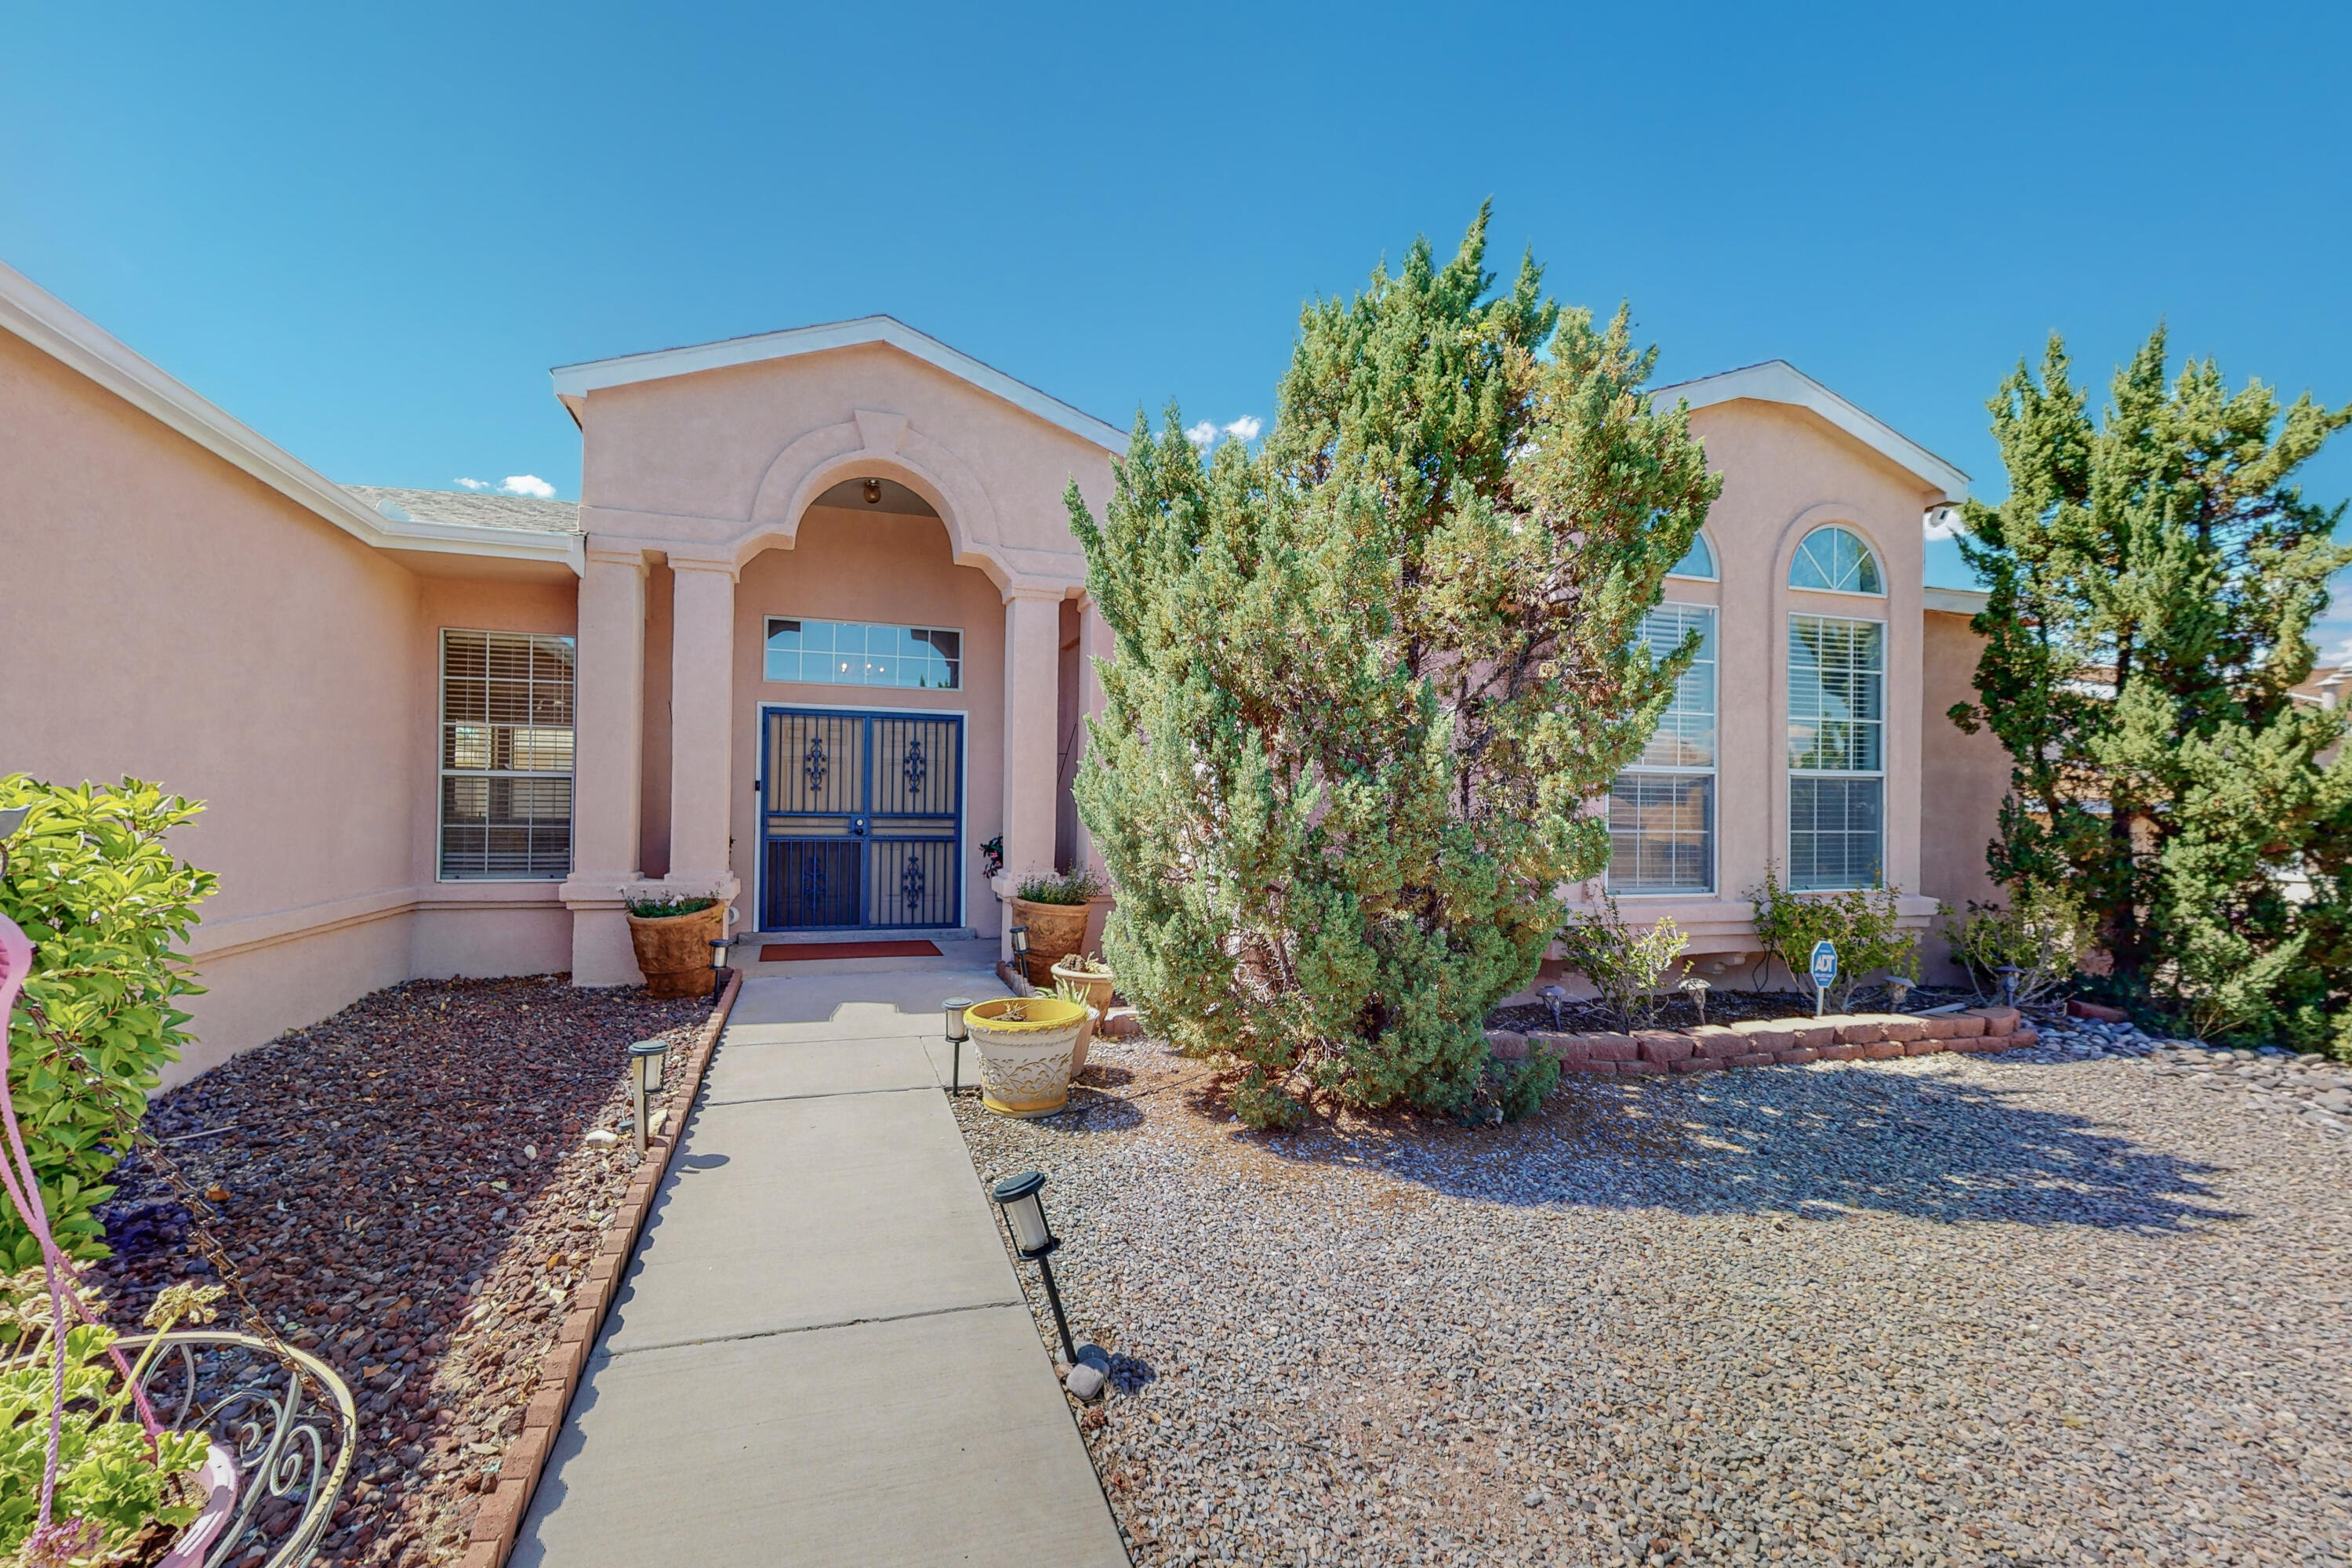 29 Parkside Road SE, Rio Rancho, New Mexico 87124, 4 Bedrooms Bedrooms, ,2 BathroomsBathrooms,Residential,For Sale,29 Parkside Road SE,1061991